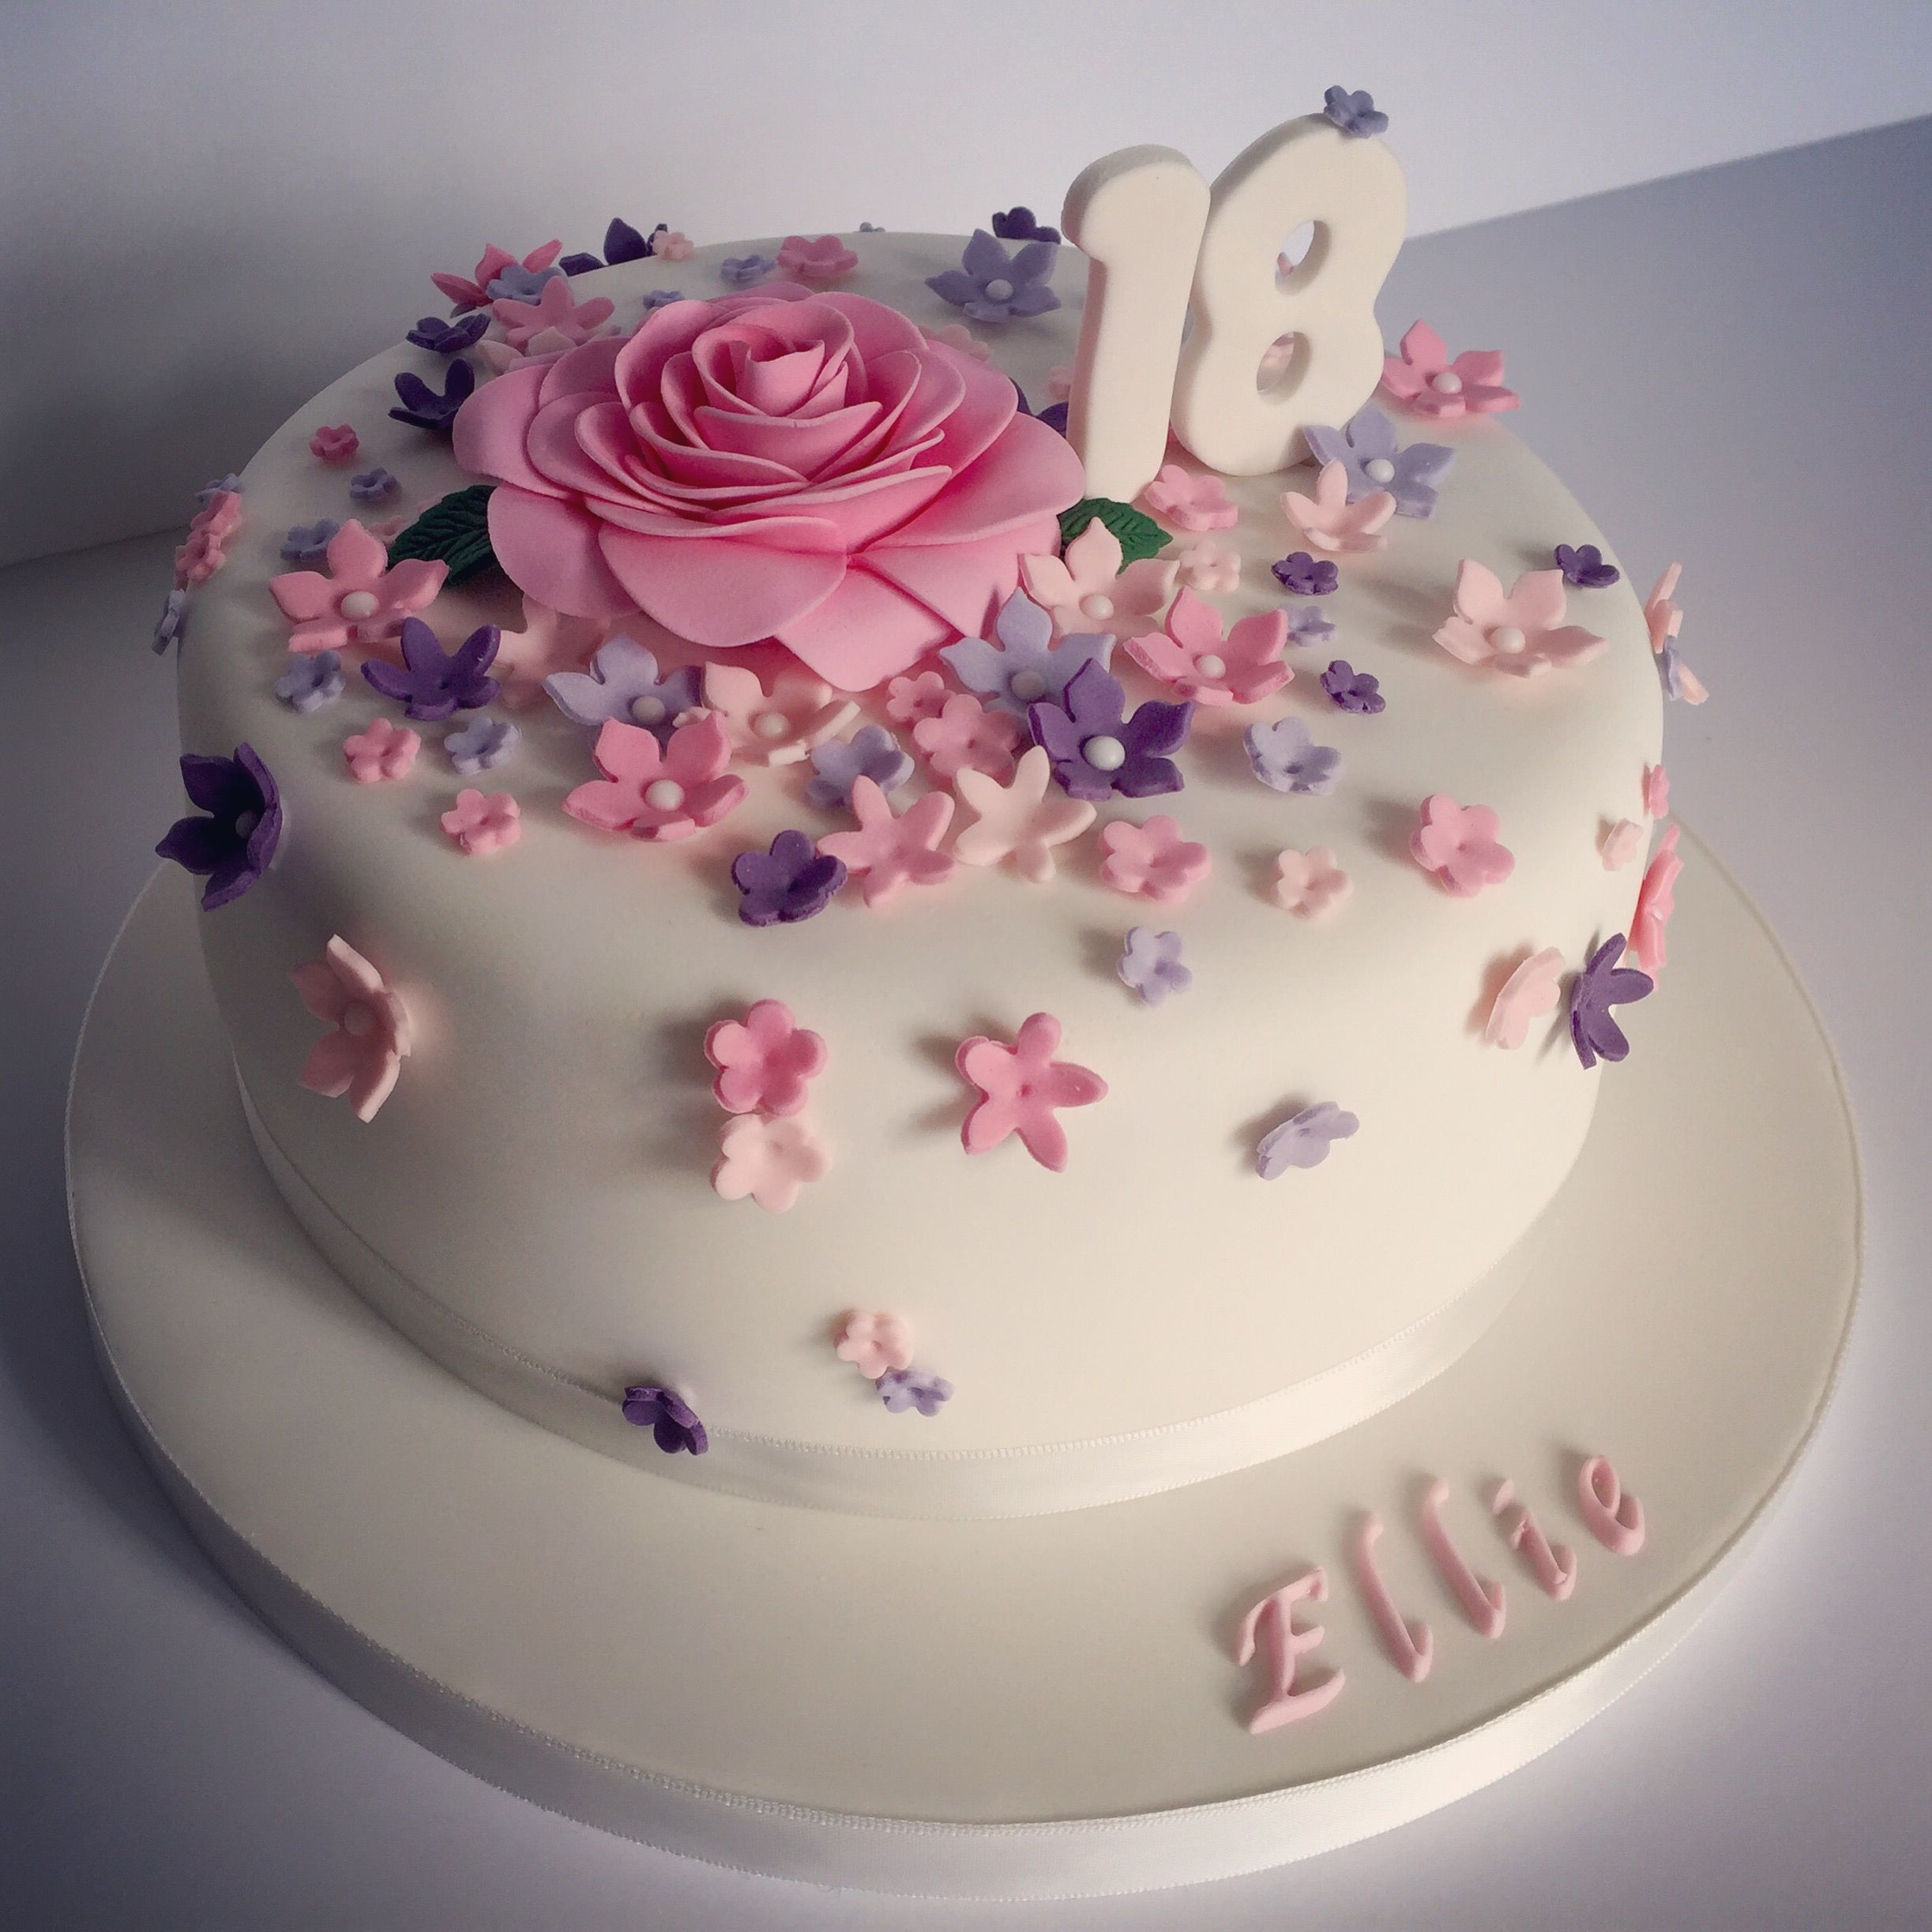 Cake Pictures For Birthday Girl
 Pretty 18th birthday cake for pretty girl Design by Elina